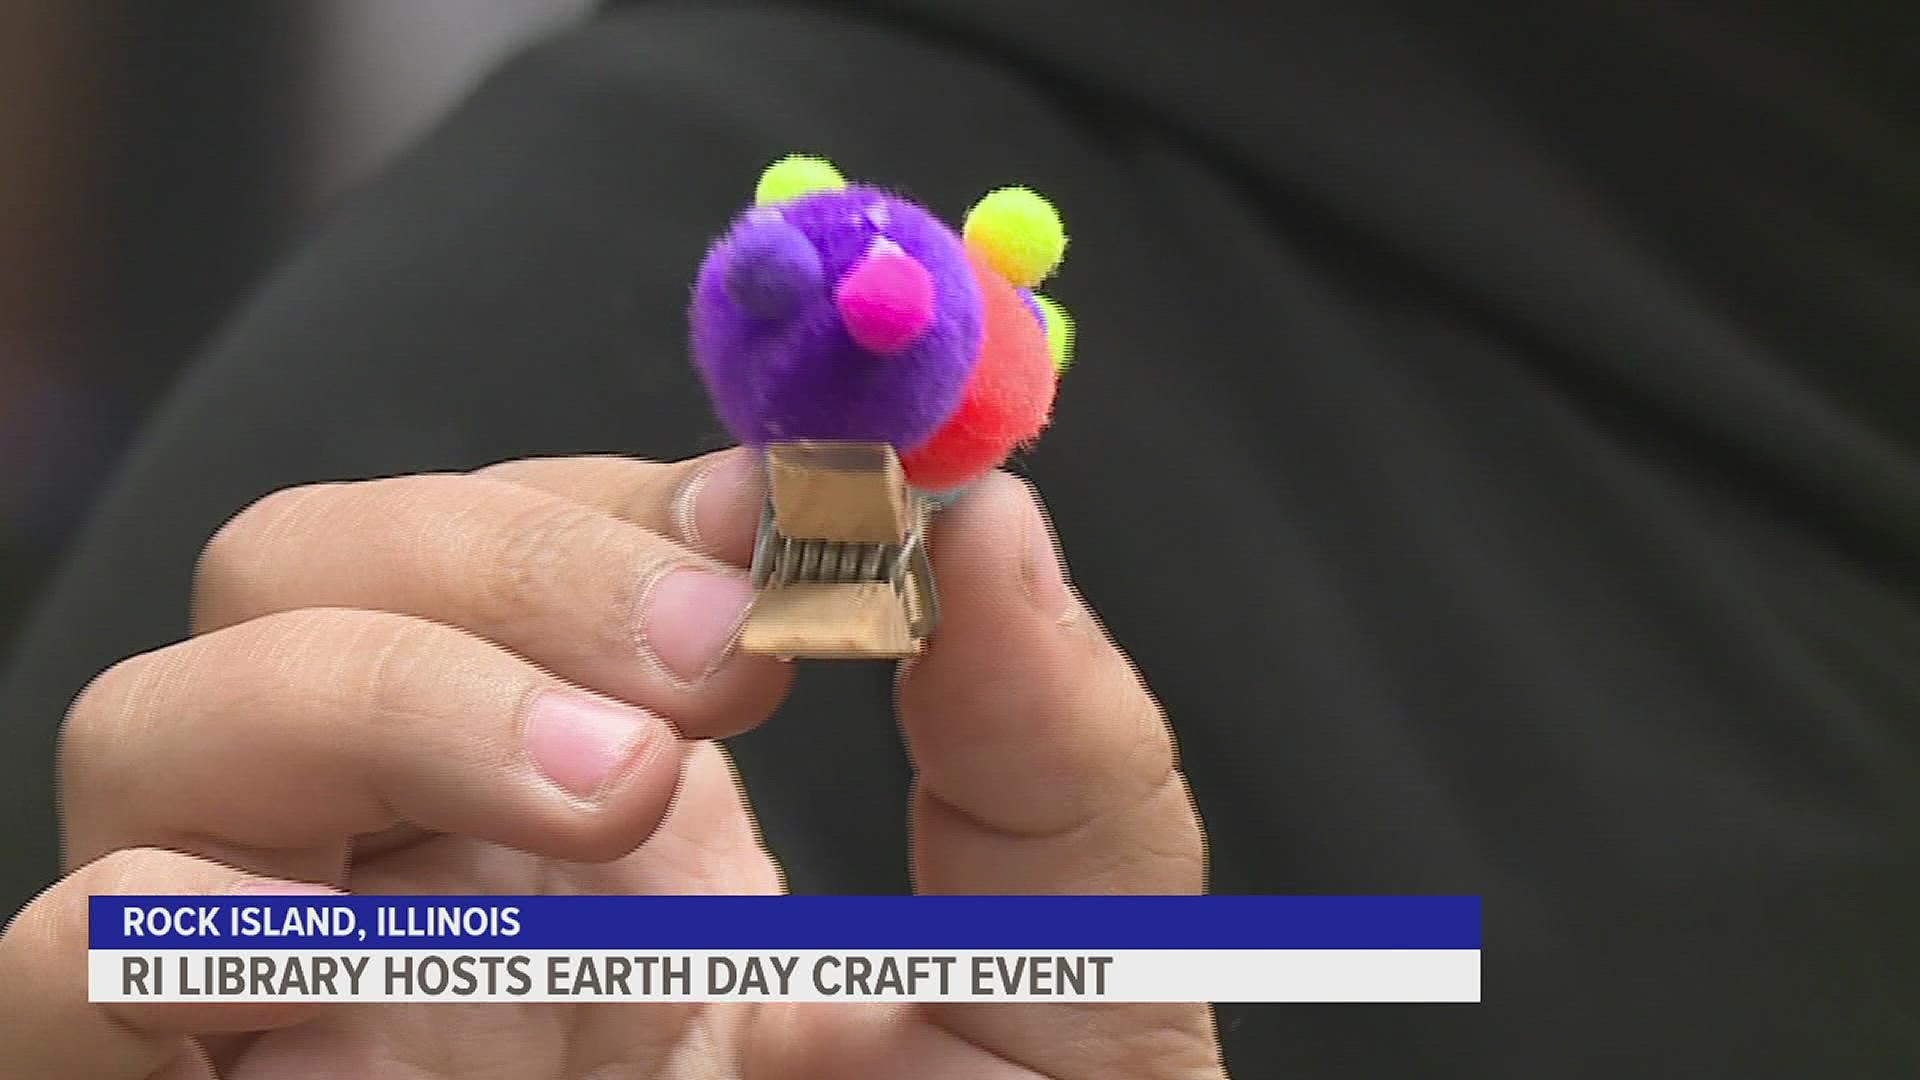 Quad Cities organizations and businesses are holding environmental events, spreading awareness, and helping the planet this Earth Day.